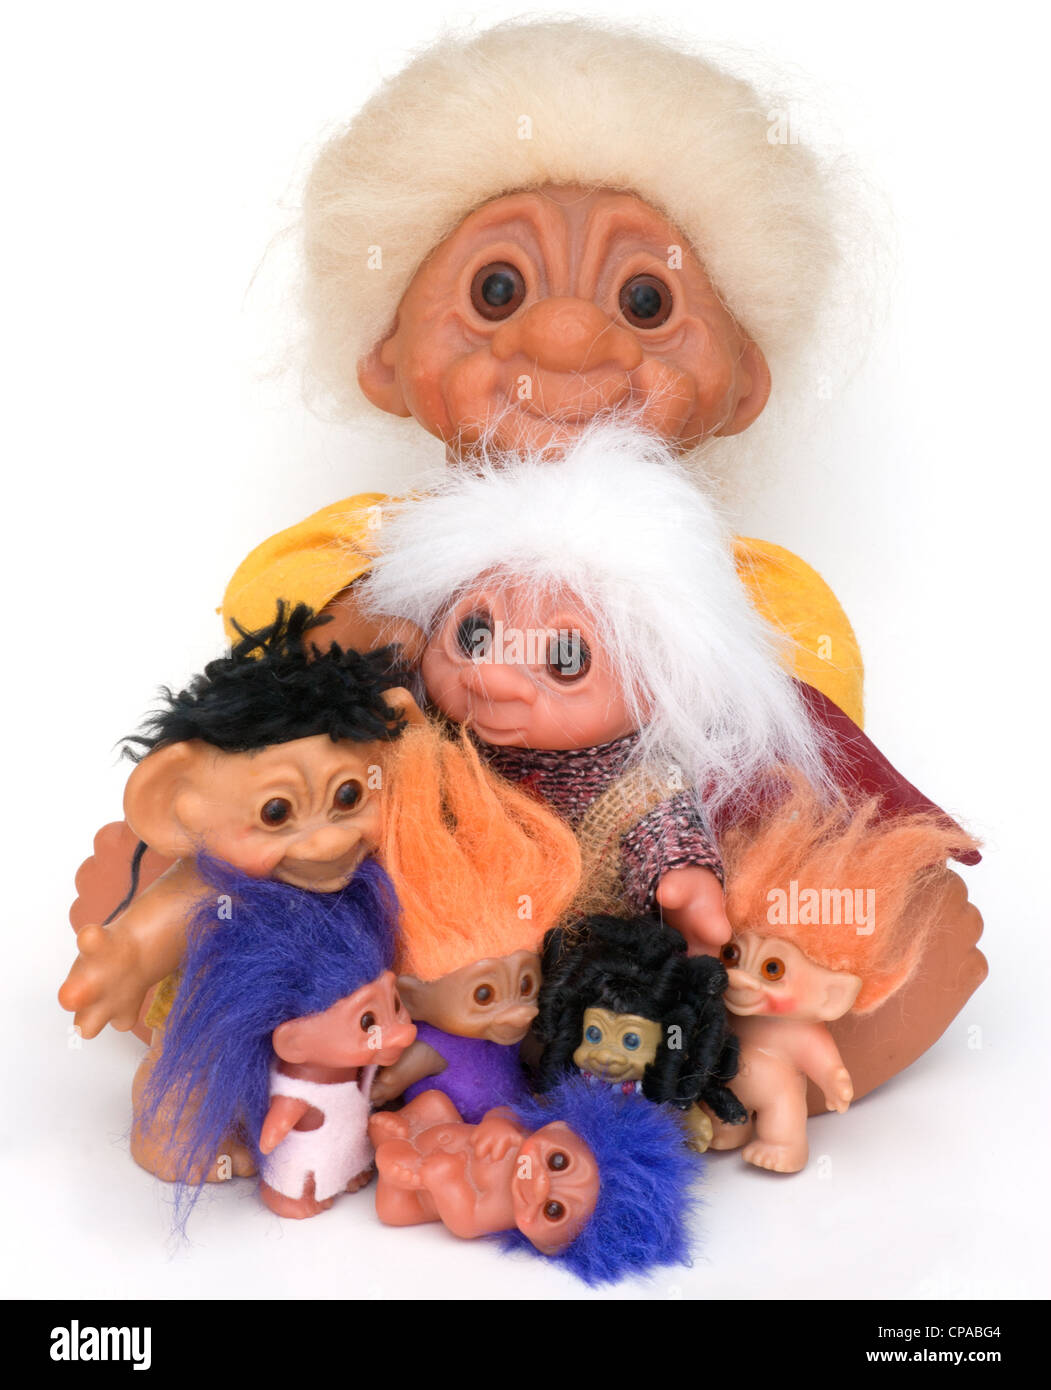 A collection or family of eight trolls or troll dolls all sizes and all colors. Stock Photo